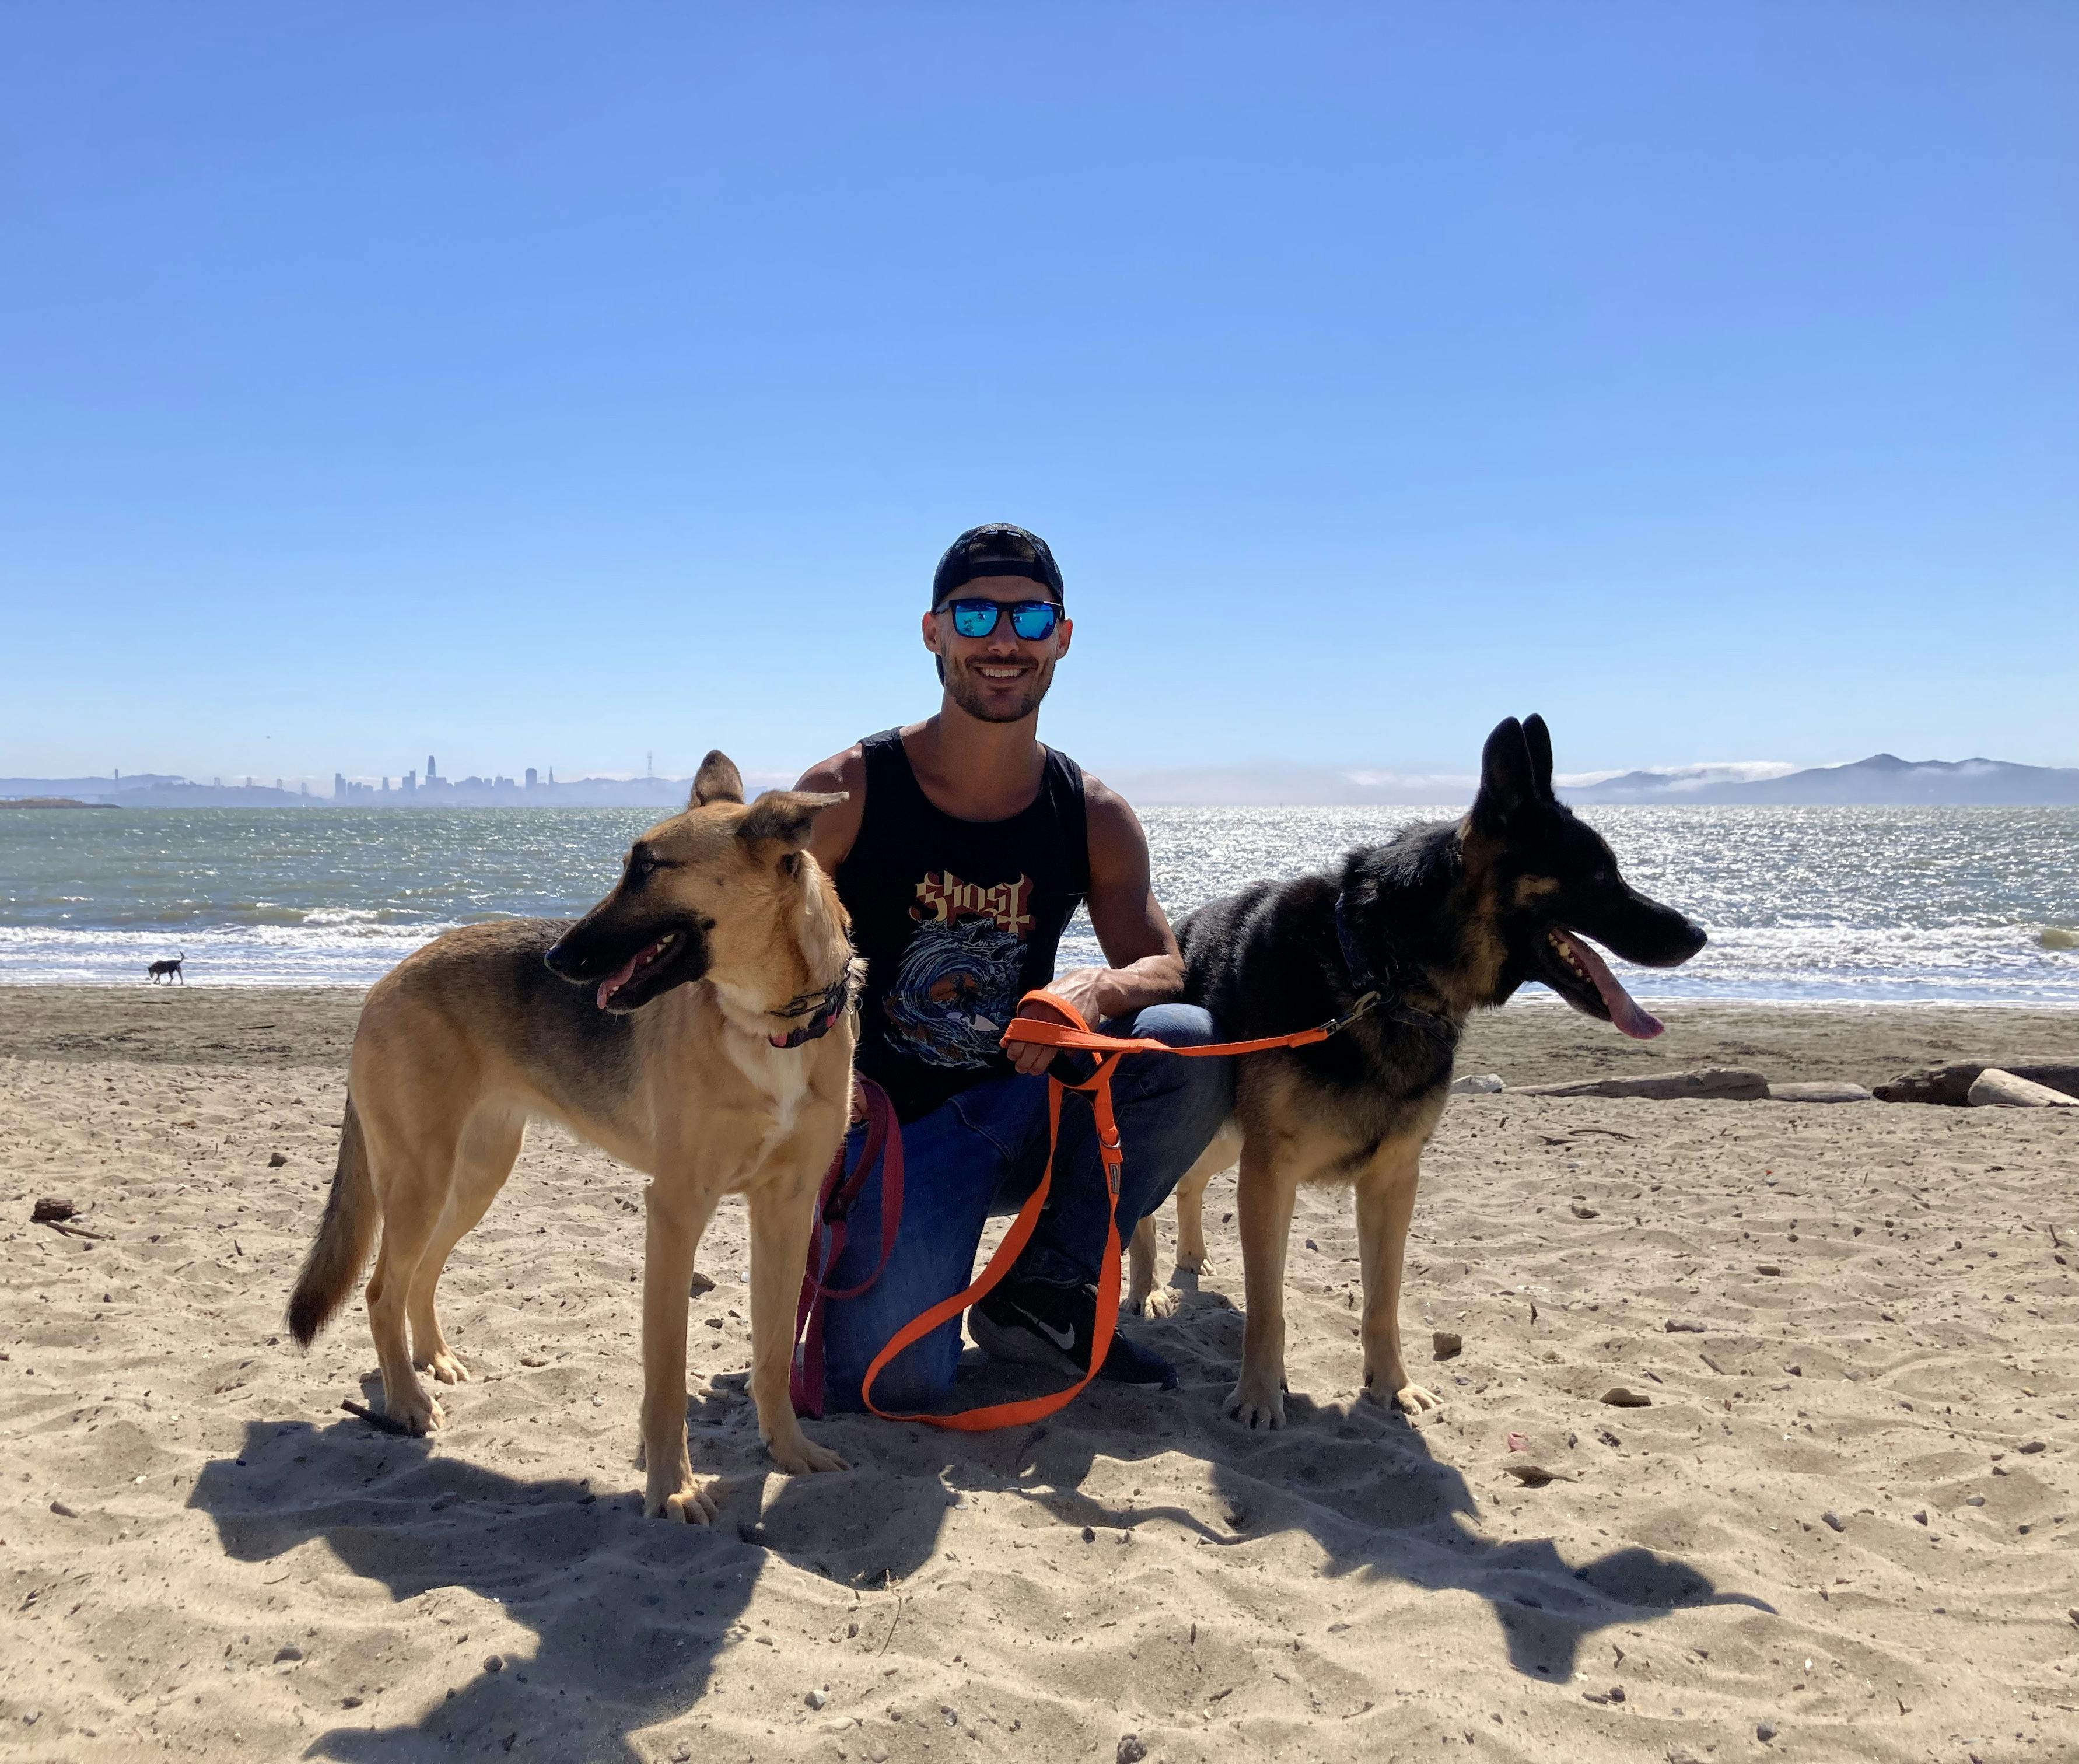 A photo of Nico with 2 German Shepherds on a beach with the San Francisco Bay in the background.